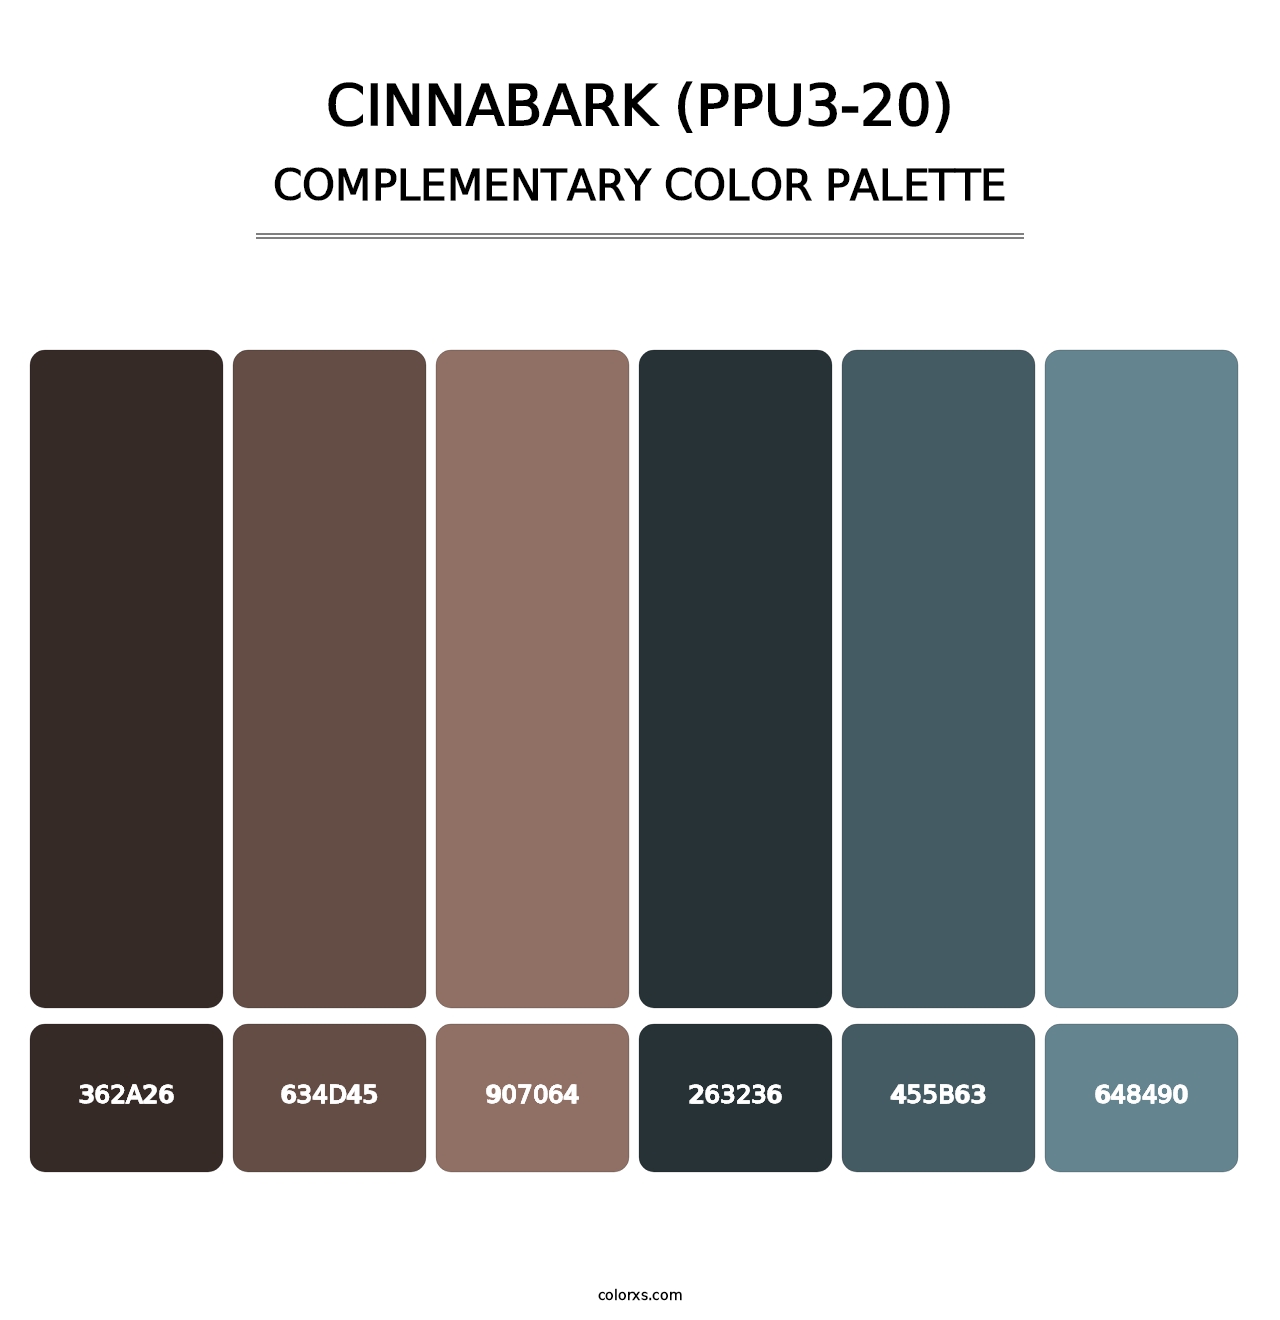 Cinnabark (PPU3-20) - Complementary Color Palette